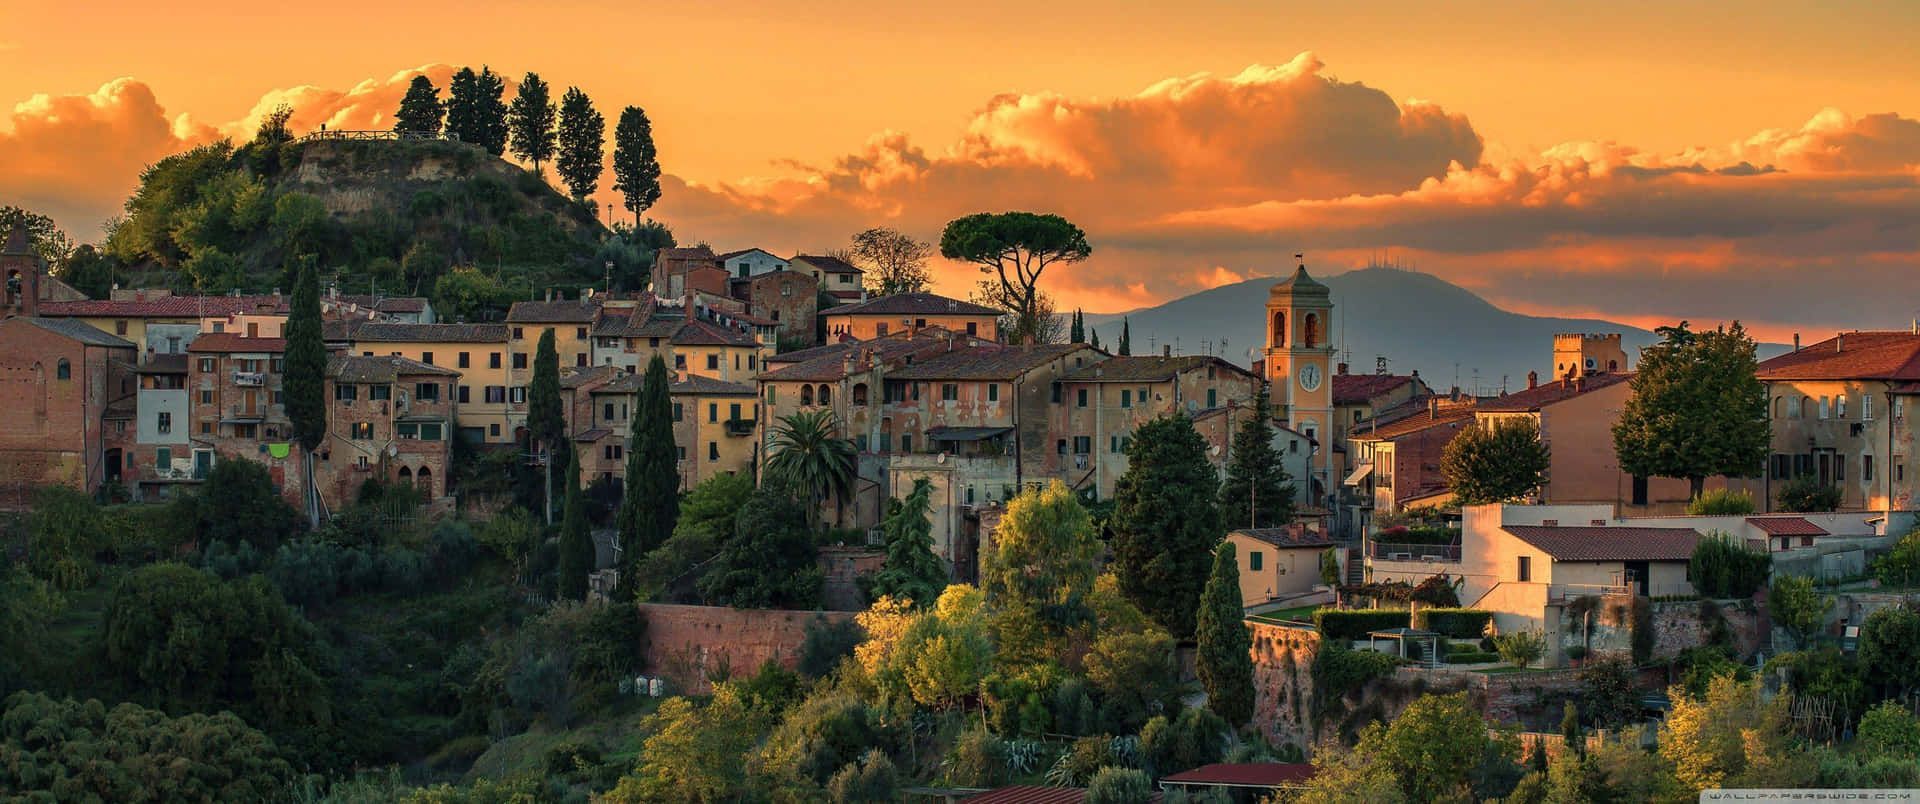 Download A Town Is Seen At Sunset In Italy Wallpaper